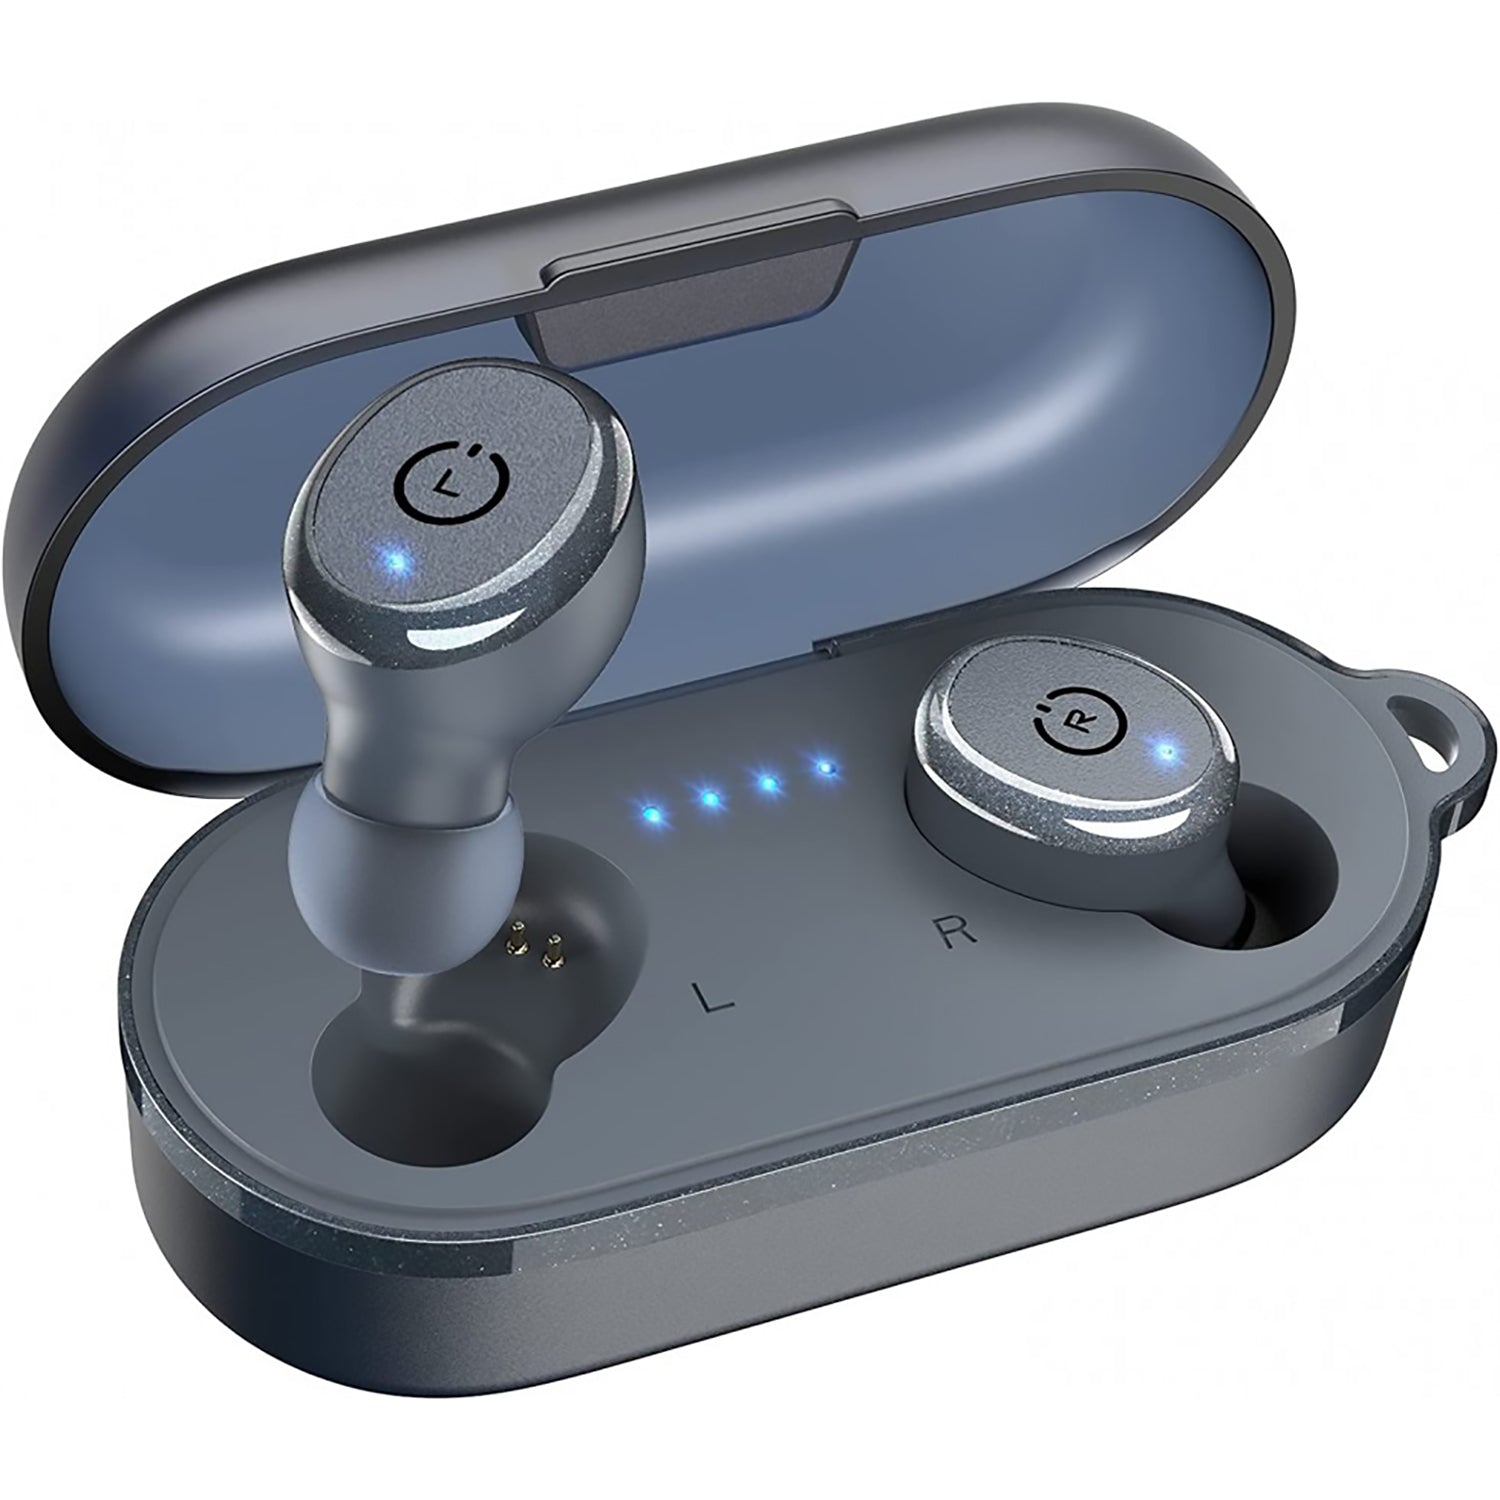 Tozo T10S Bluetooth Wireless Earbuds, Waterproof, Touch Controls with Wireless Charging Case - Blue - Pro-Distributing